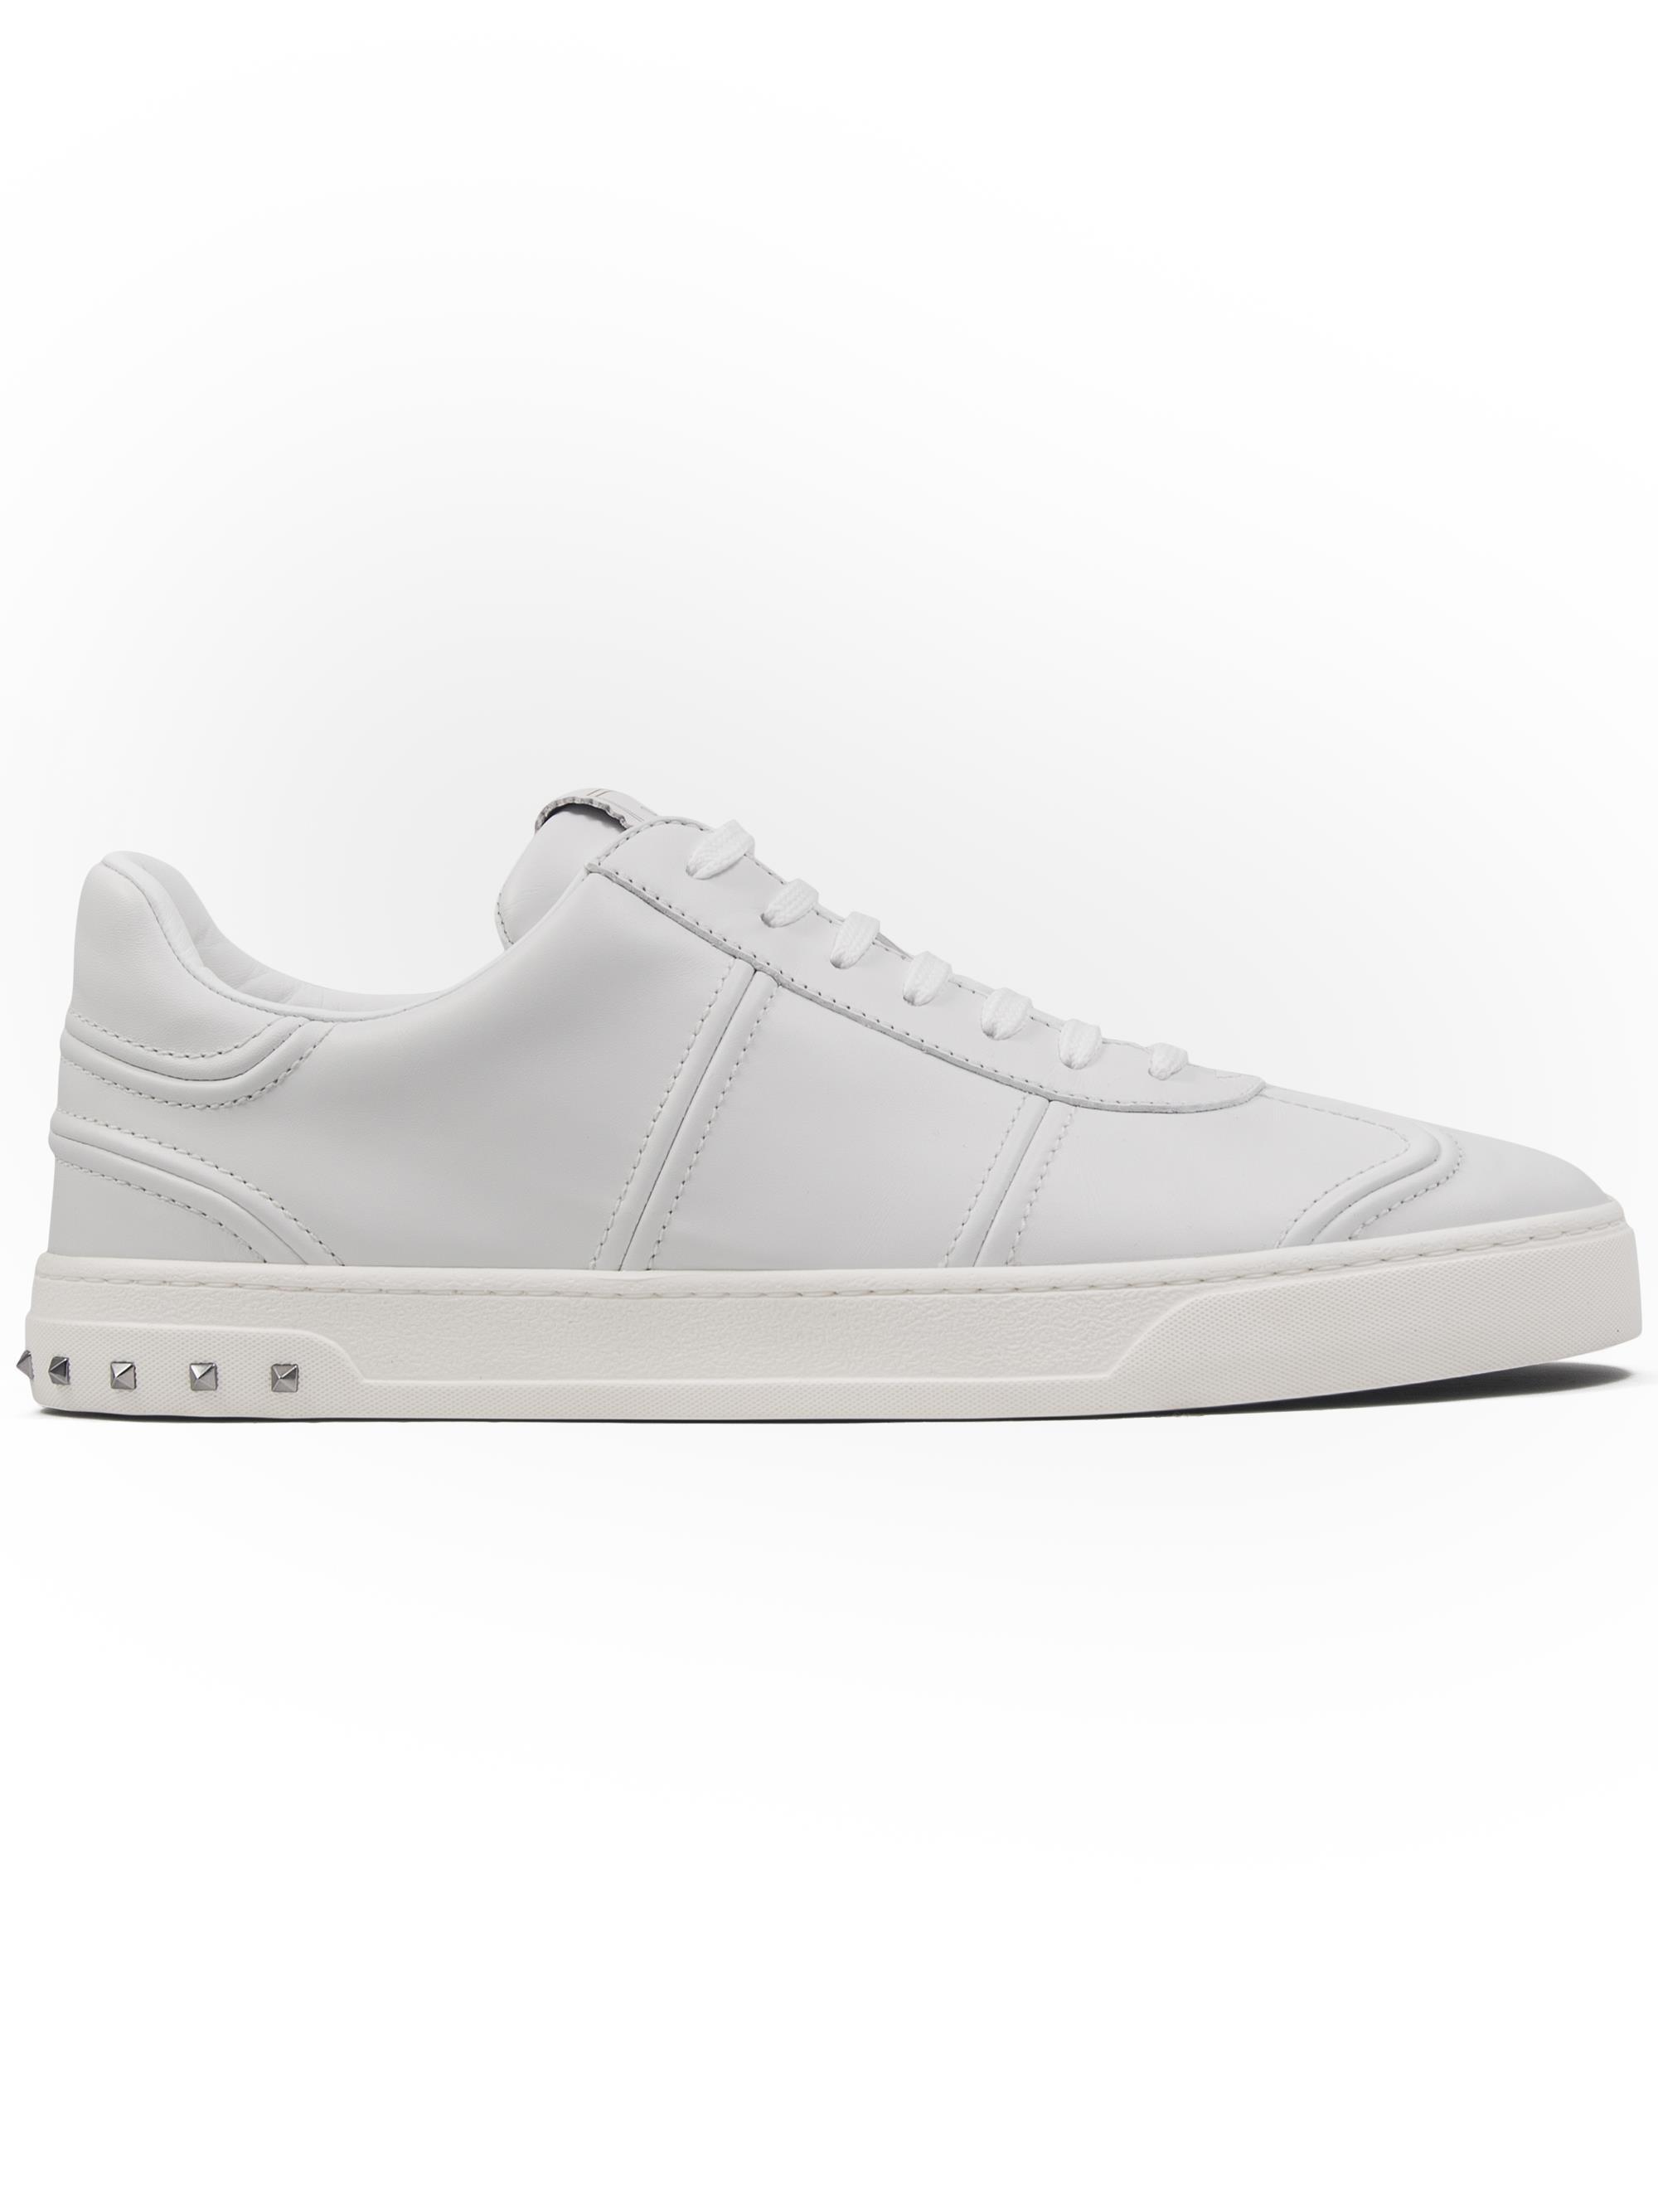 Lyst - Valentino Flycrew Sneakers in White for Men